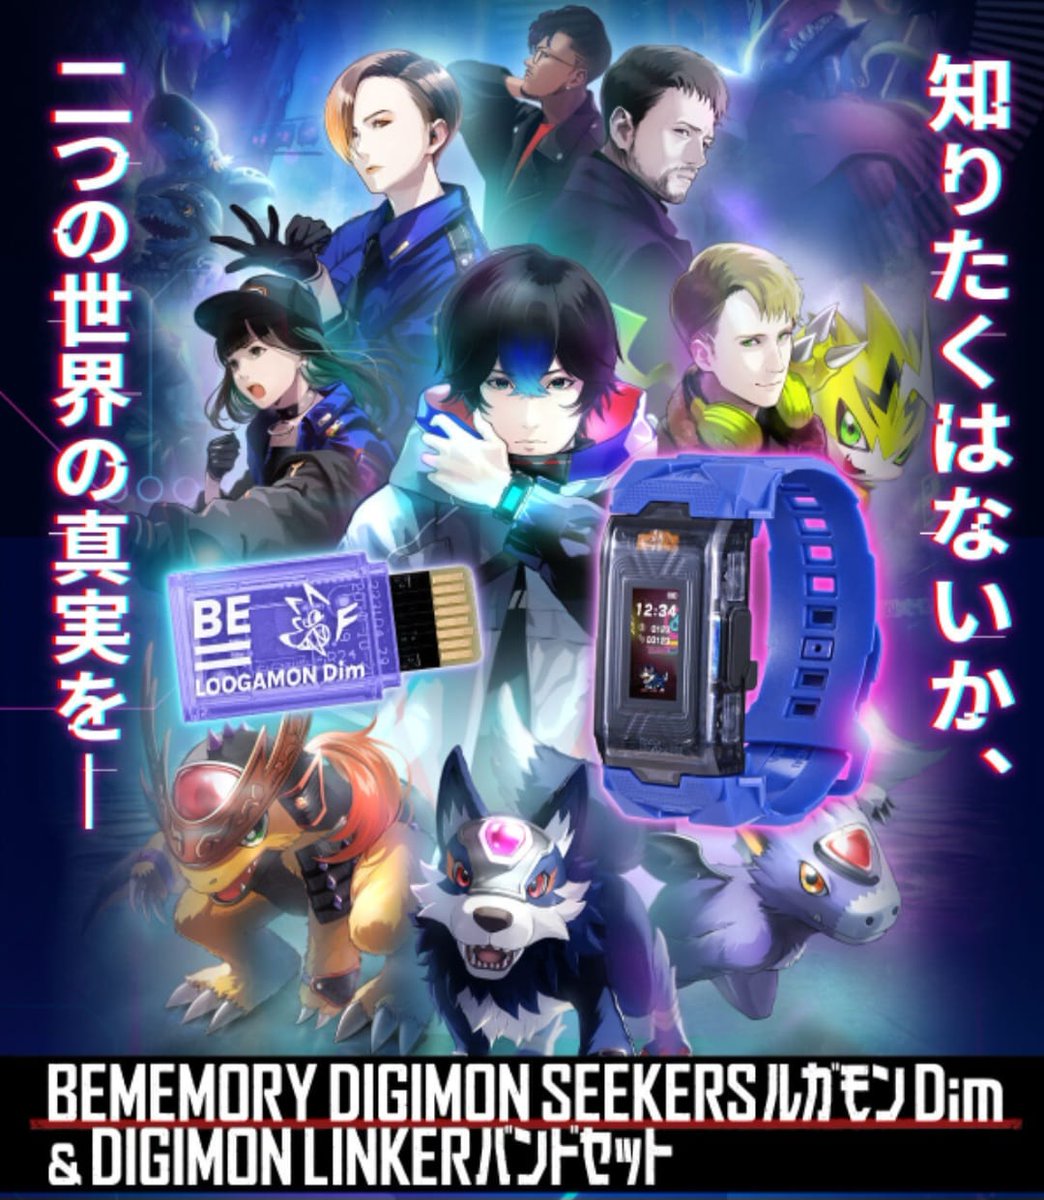 NEW BE MEMORY PREORDERS OPEN!
DIGIMON SEEKERS 
1) BEMEMORY SPECIAL SELECTION VOL.2 HOLY WINGS & FOREST GUARDIANS

2) BE MEMORY DIGIMON SEEKERS RYUDAMON & DORUMON 
(PREMIUM BANDAI EXCLUSIVE)

3) BE MEMORY DIGMON SEEKERS LOOGAMON & DIGIMON LINKER BAND RESTOCK.
this is instock and…